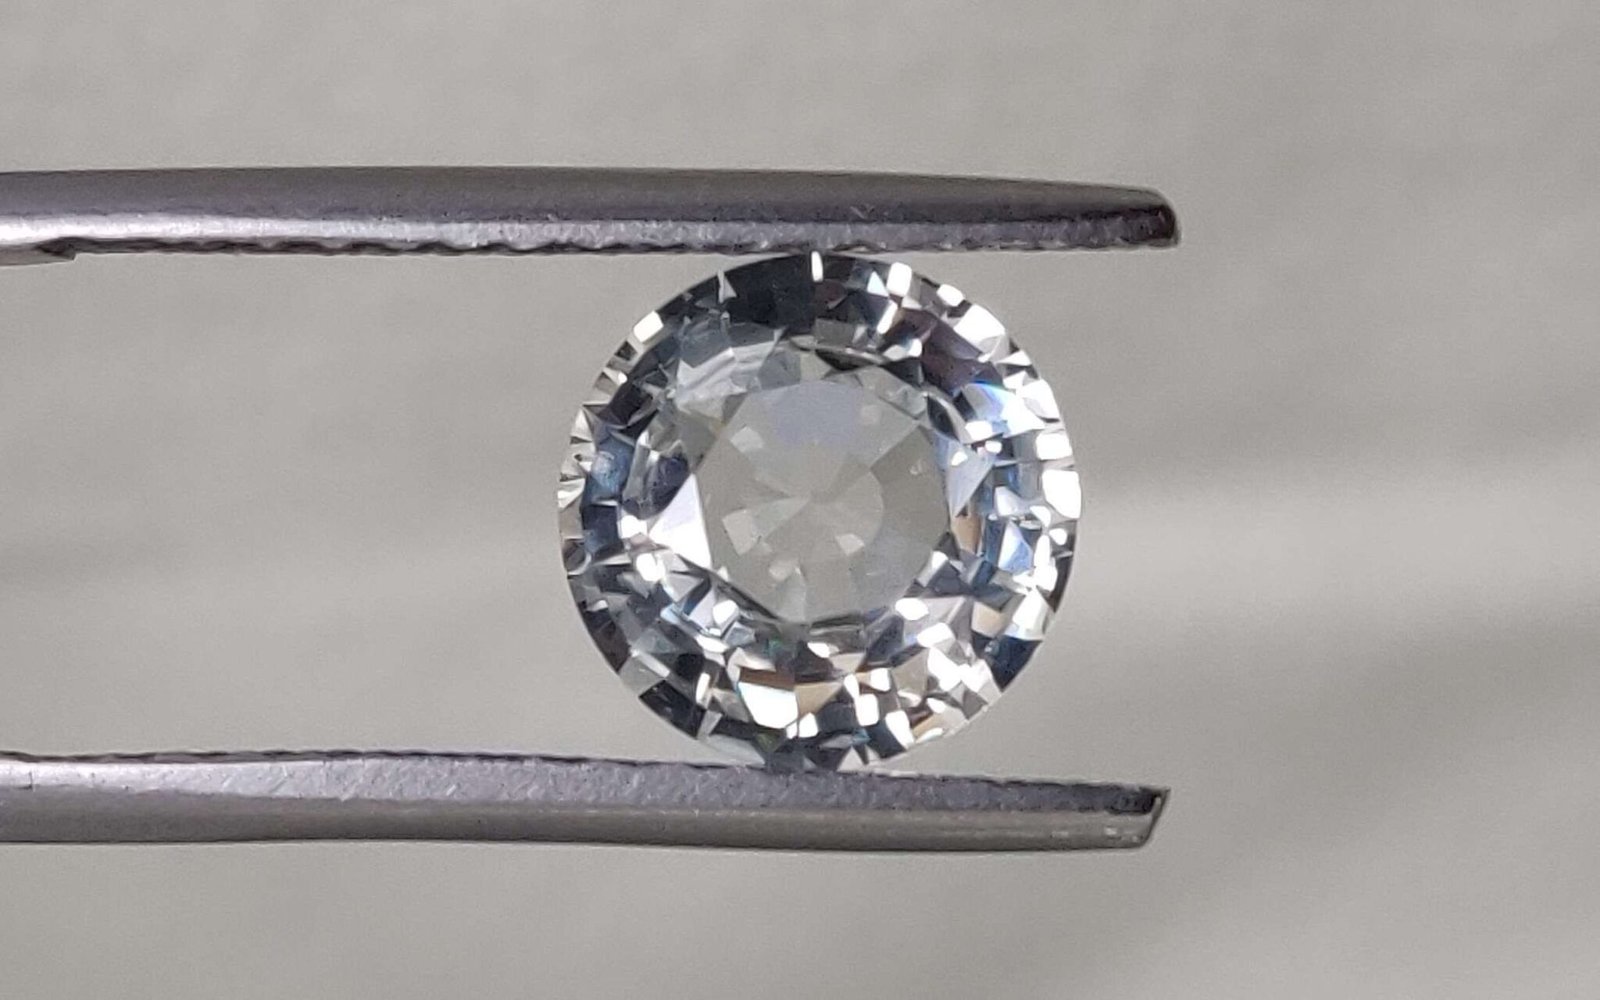 Six Top Diamond Alternatives You May Not Know About